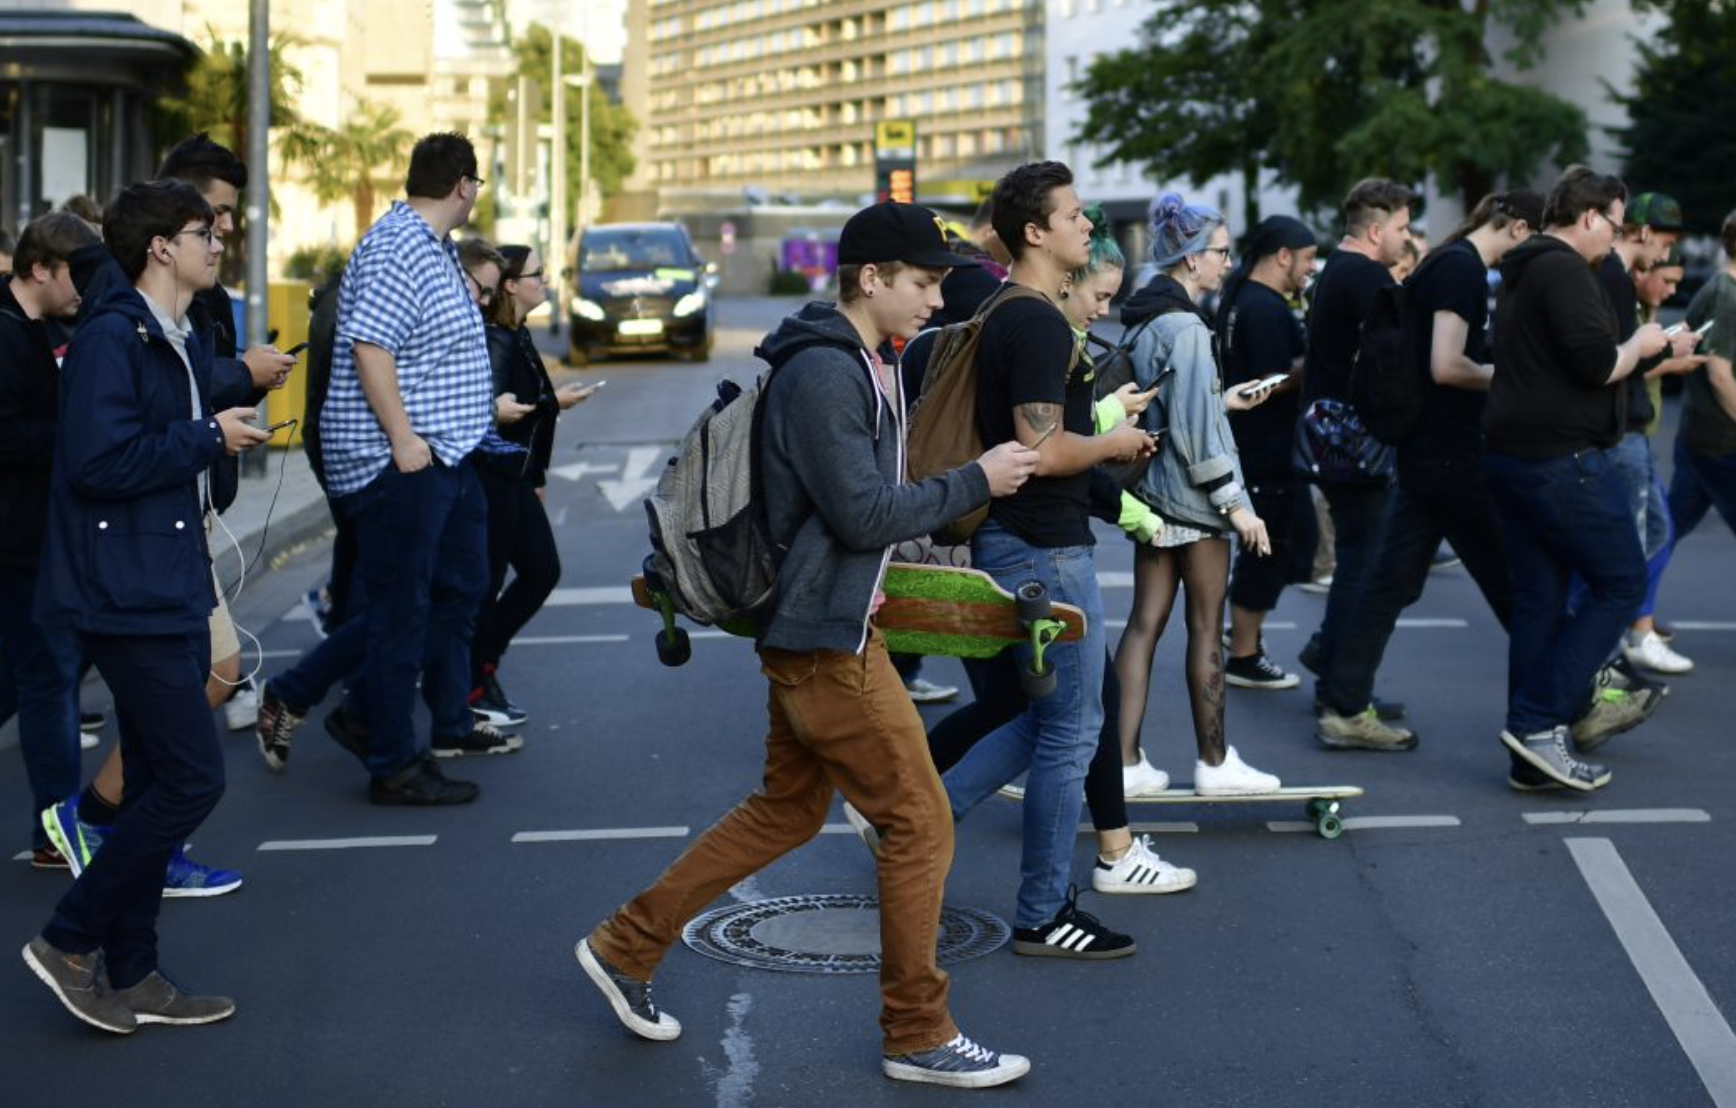 Crowd of men walking with devices